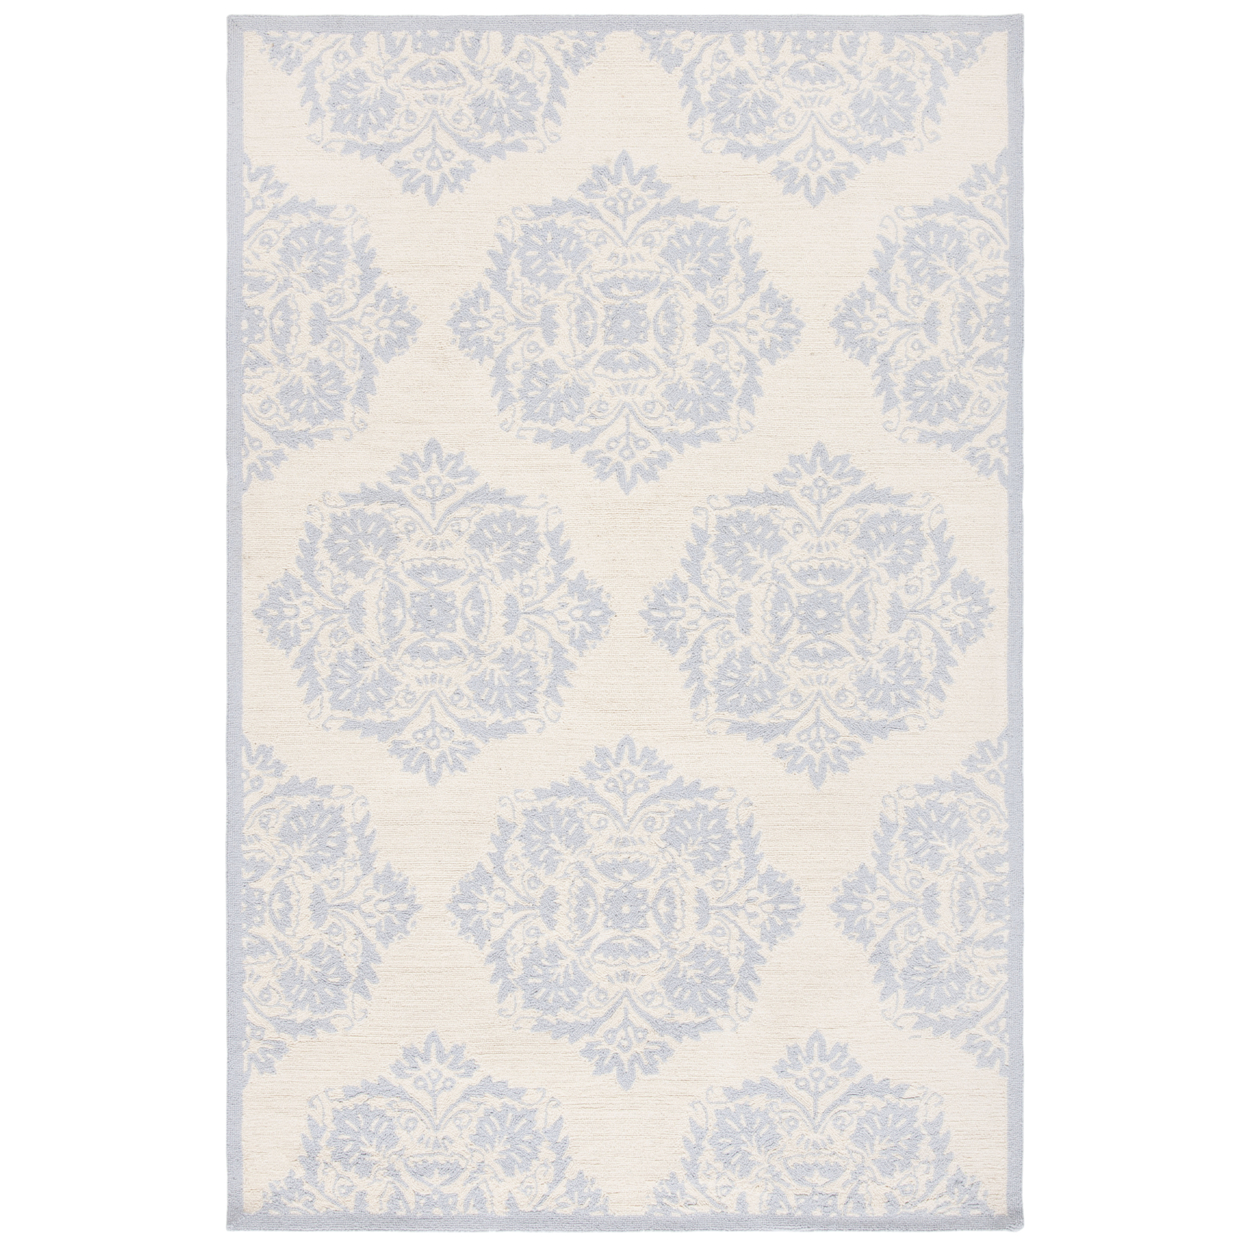 SAFAVIEH Chelsea HK359A Hand-hooked Ivory / Blue Rug - 8' 9 X 11' 9